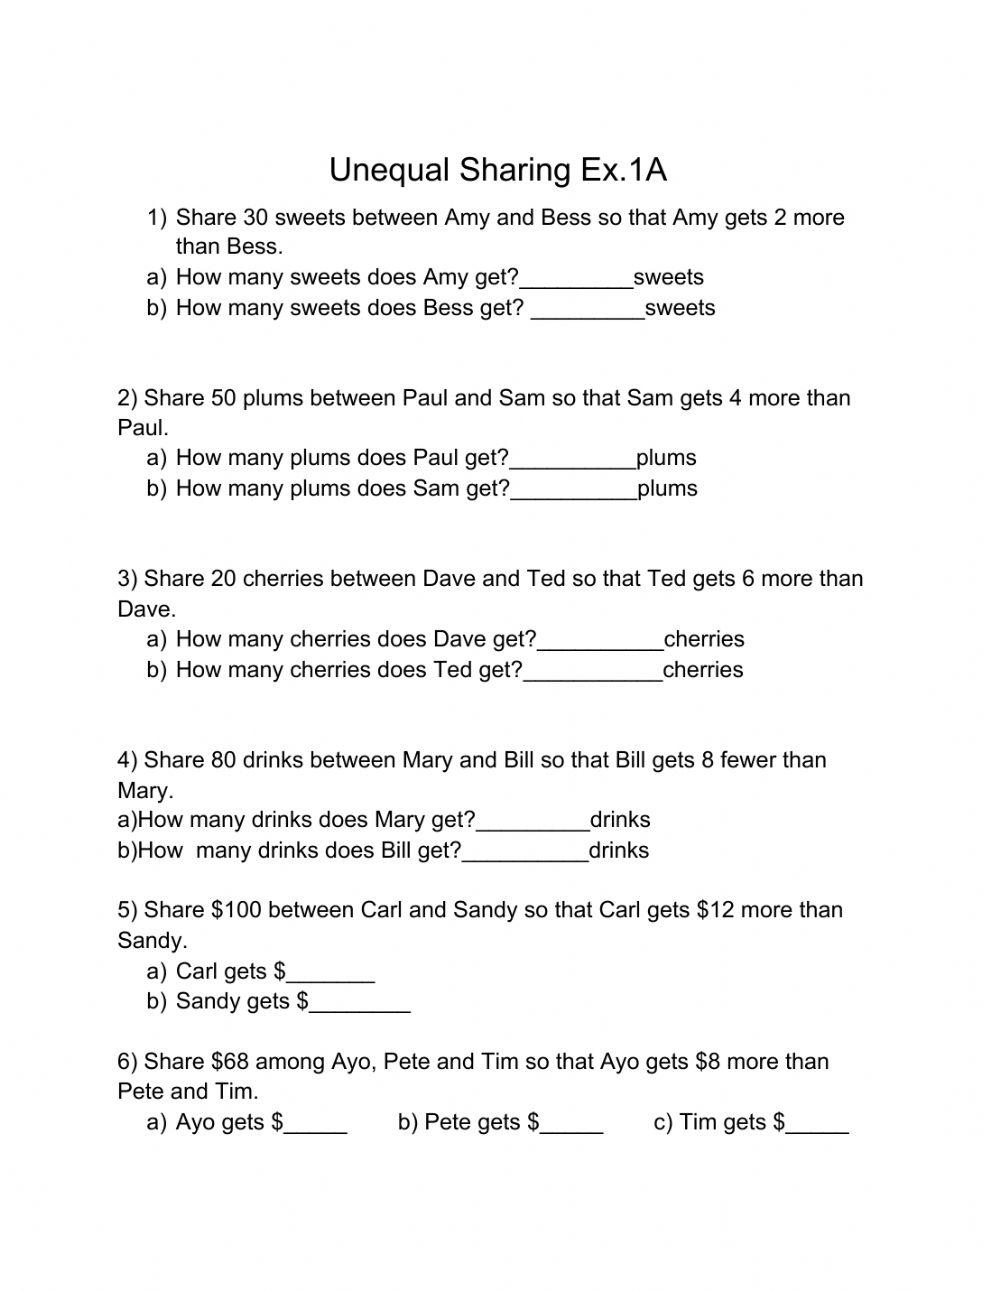 Unequal Sharing Ex. 1A